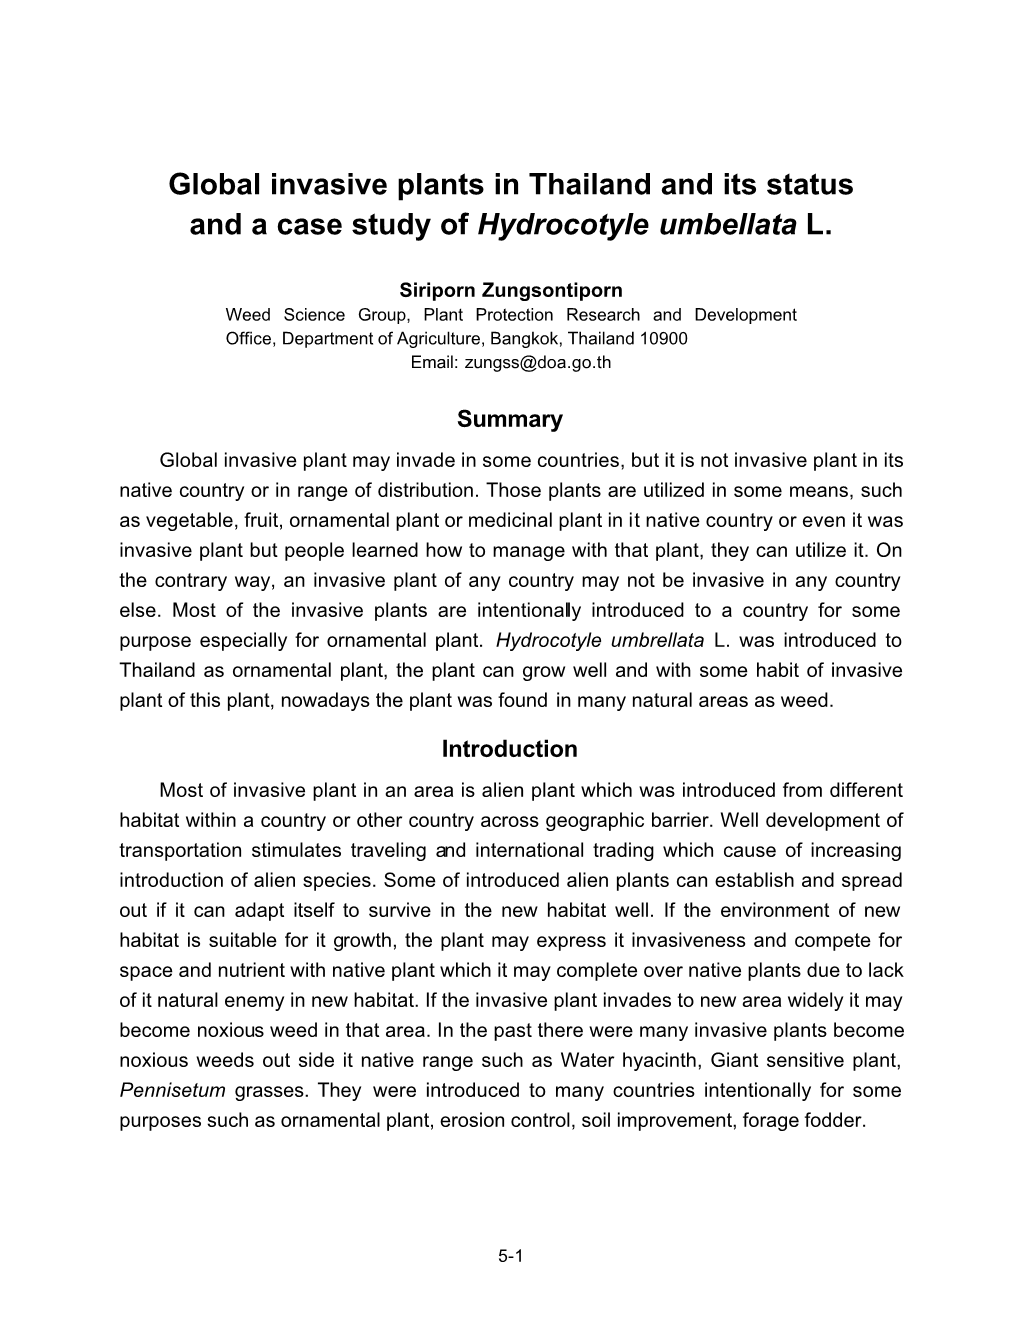 Global Invasive Plants in Thailand and Its Status and a Case Study of Hydrocotyle Umbellata L